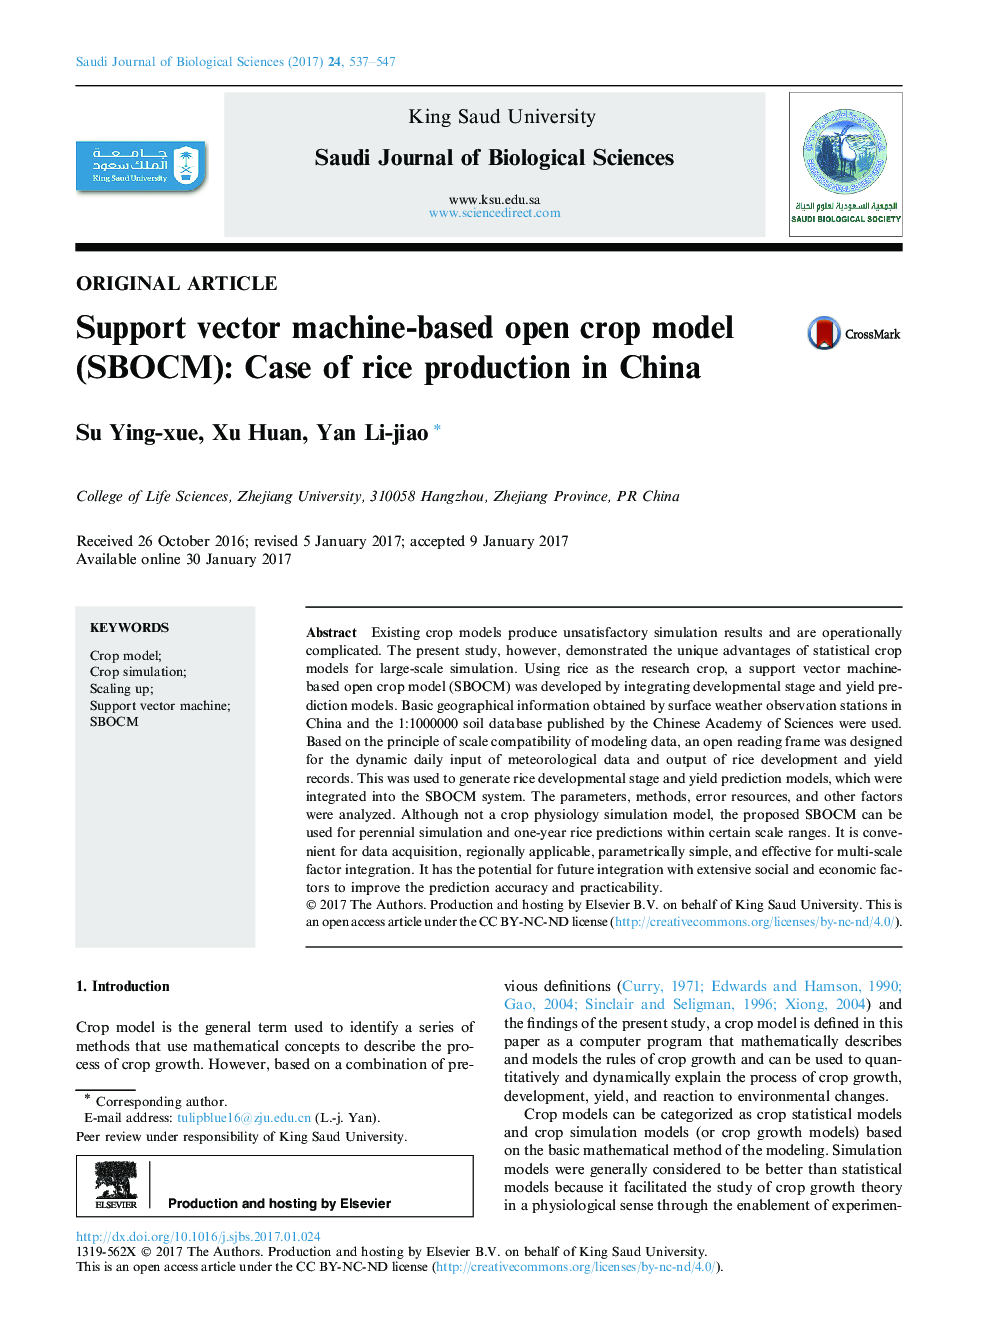 Original articleSupport vector machine-based open crop model (SBOCM): Case of rice production in China